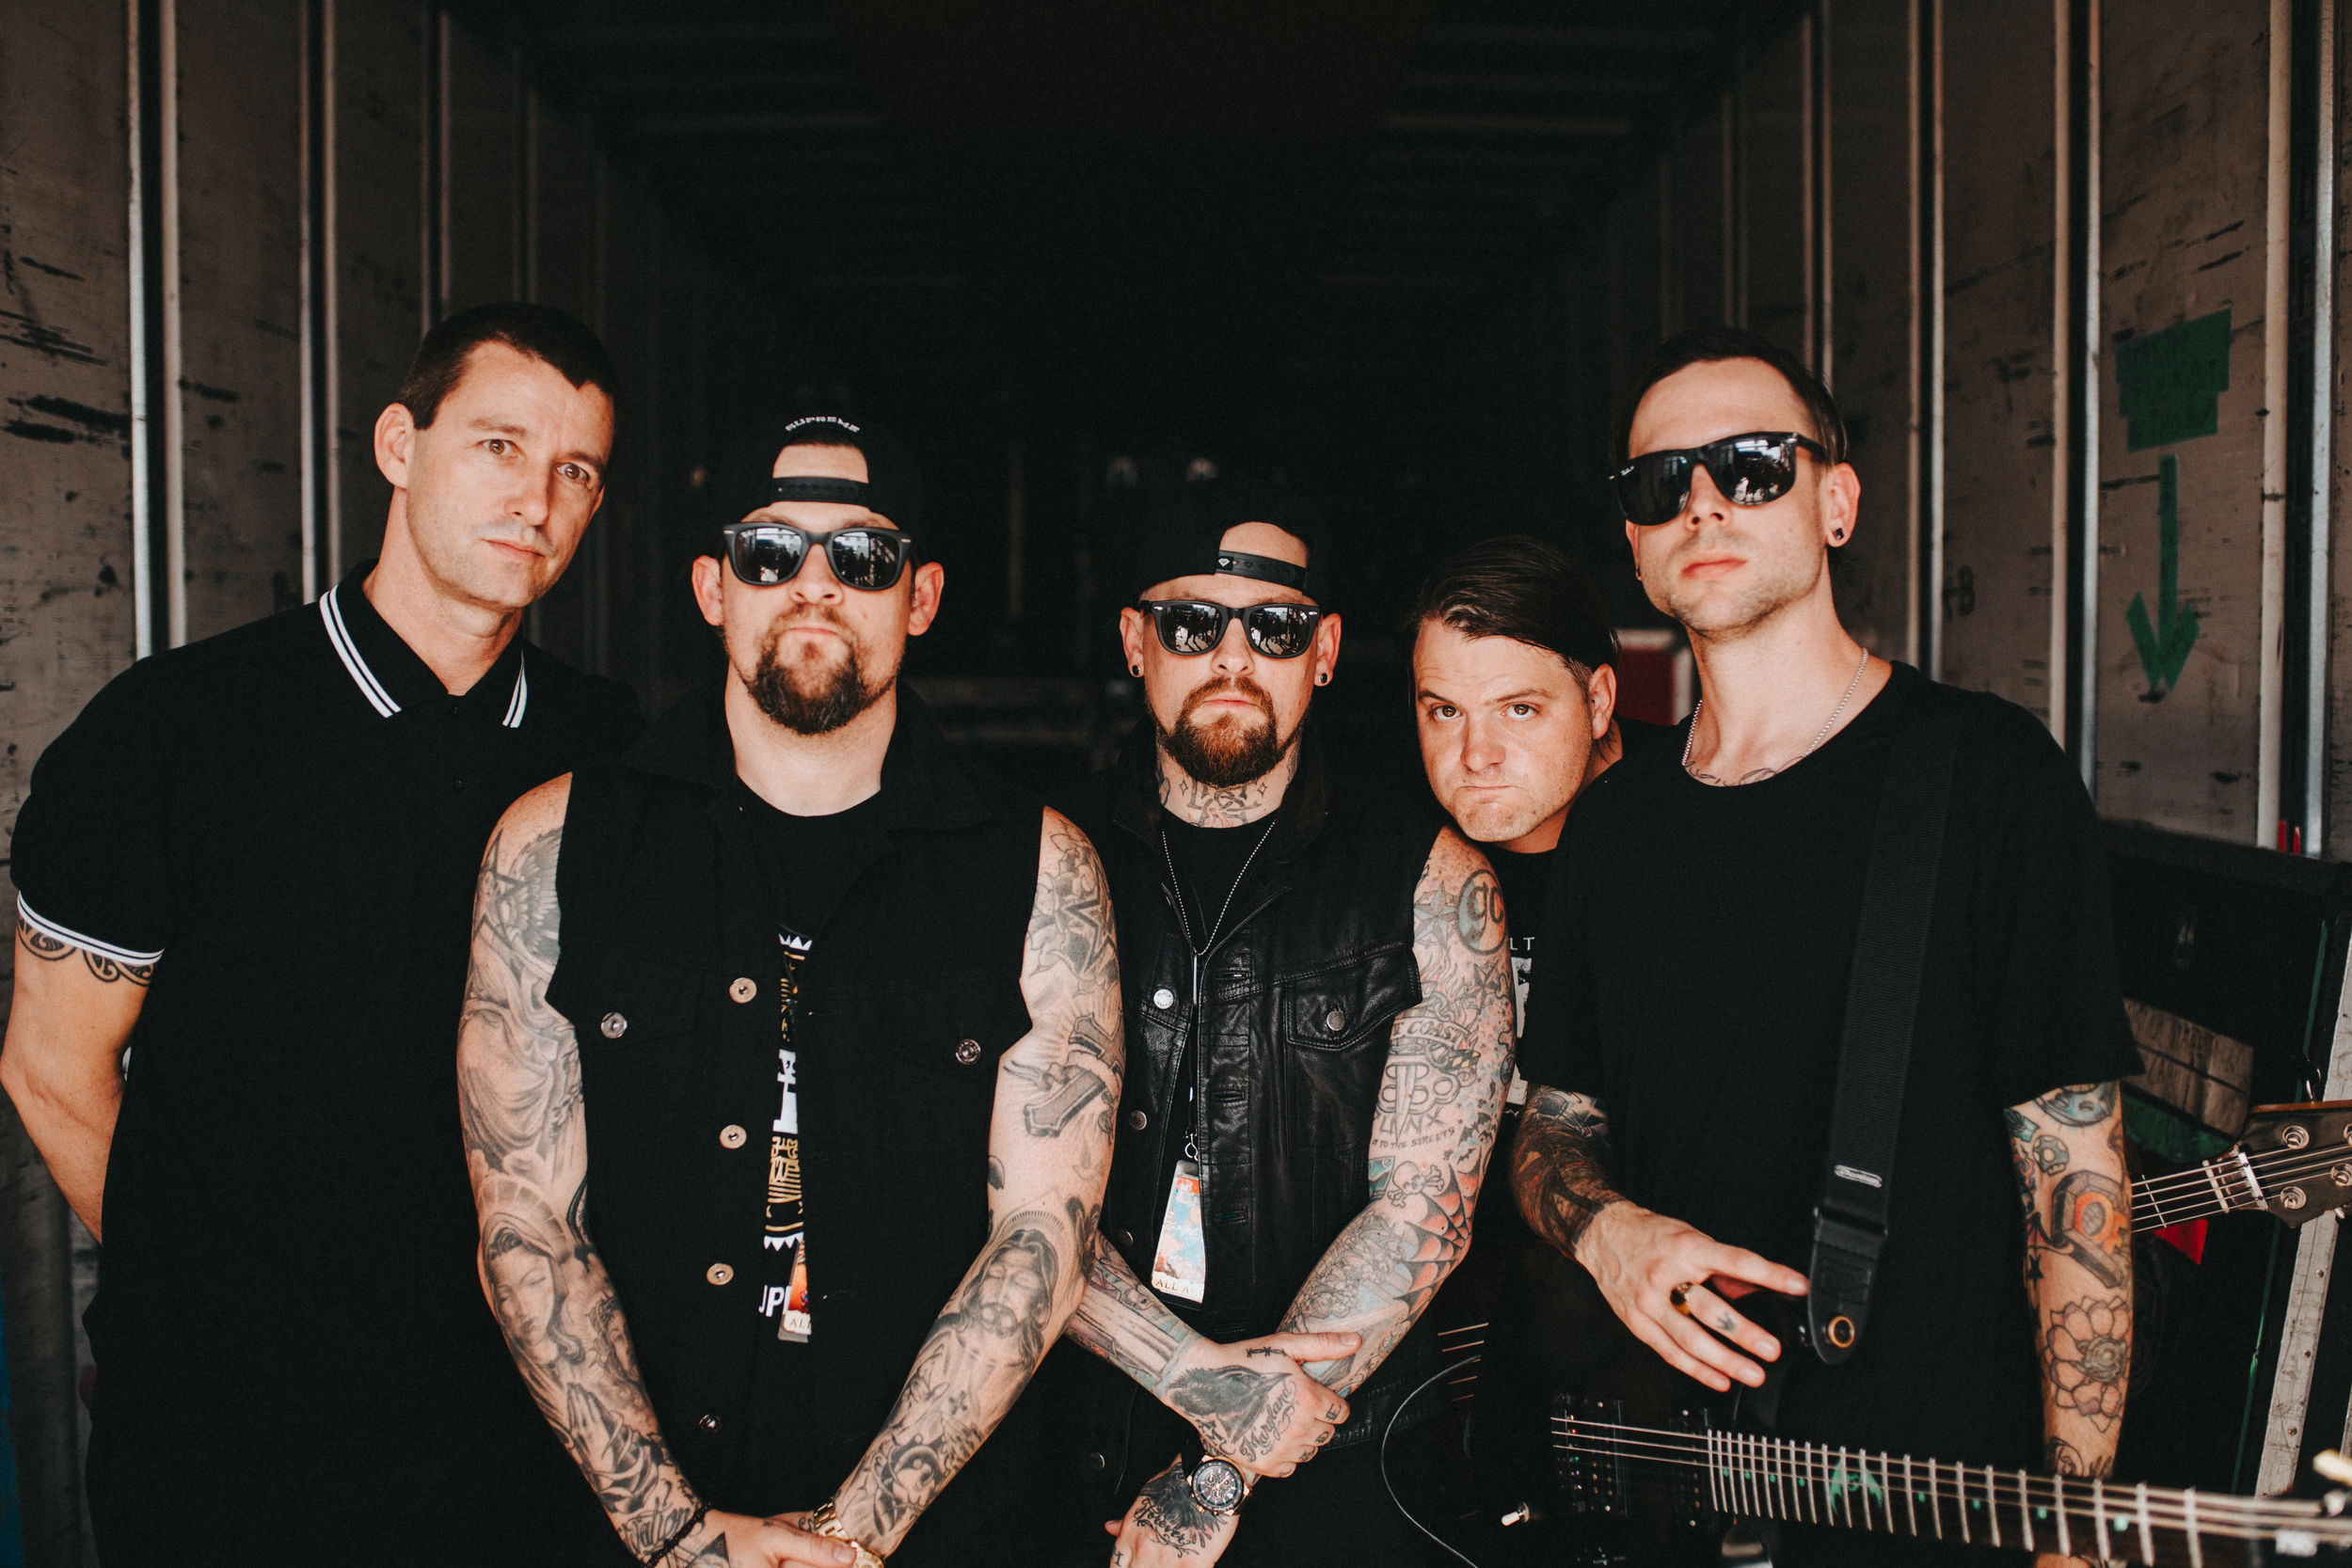   Noblesville, IN.  Good Charlotte's first day on Warped. This is by far, my favorite band portrait of all time.  I took it and wanted to run to my bus to edit right away.&nbsp;  